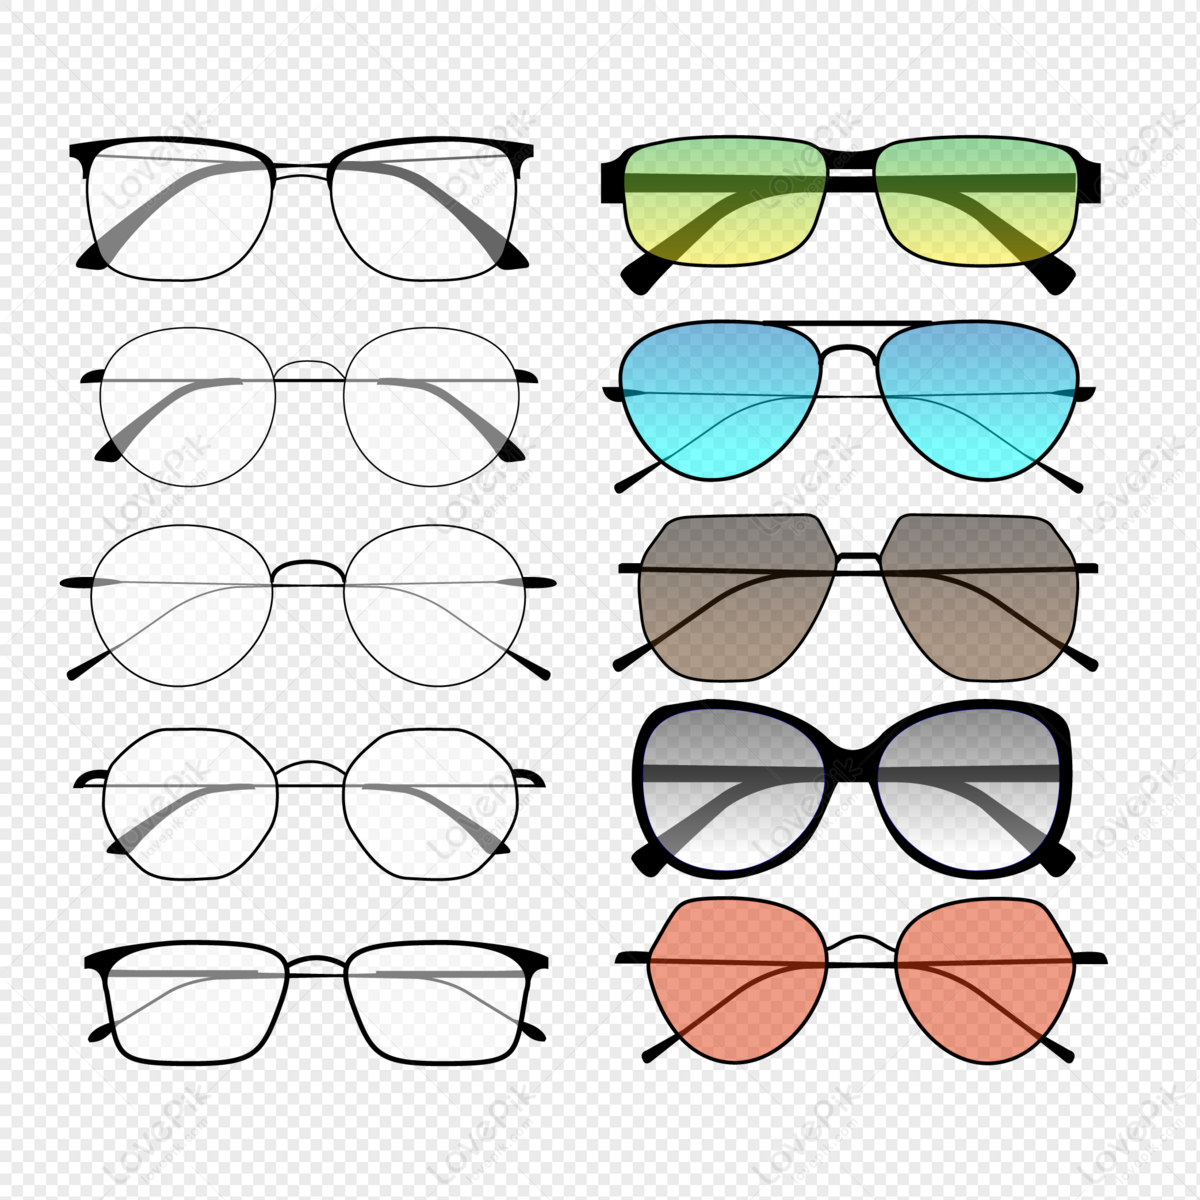 Vector Glasses Collection PNG Transparent Background And Clipart Image For  Free Download - Lovepik | 401331440